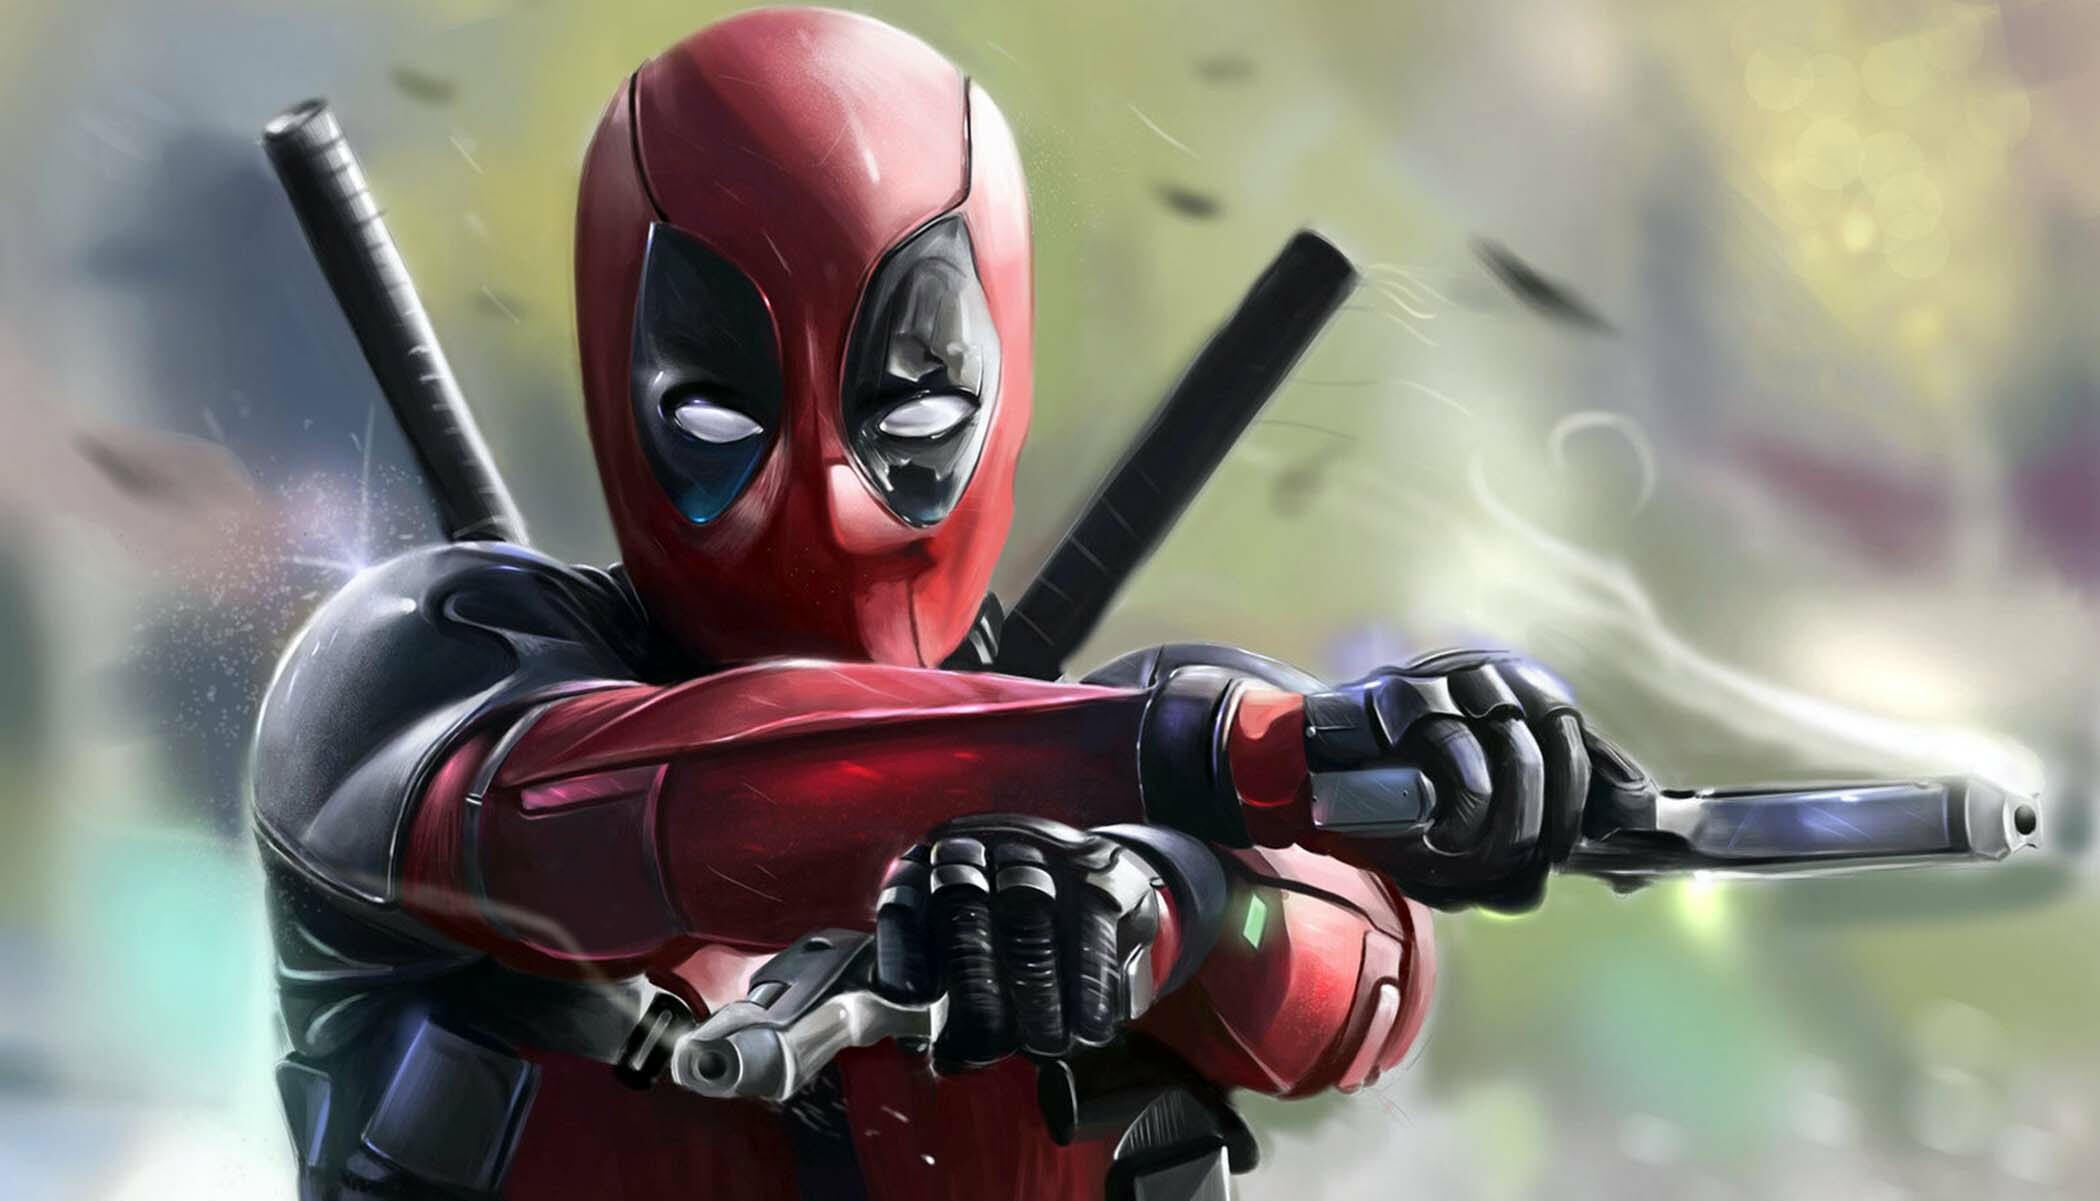 Deadpool: The inspiration for the character's name comes from the 1988 Dirty Harry film The Dead Pool. 2100x1210 HD Wallpaper.